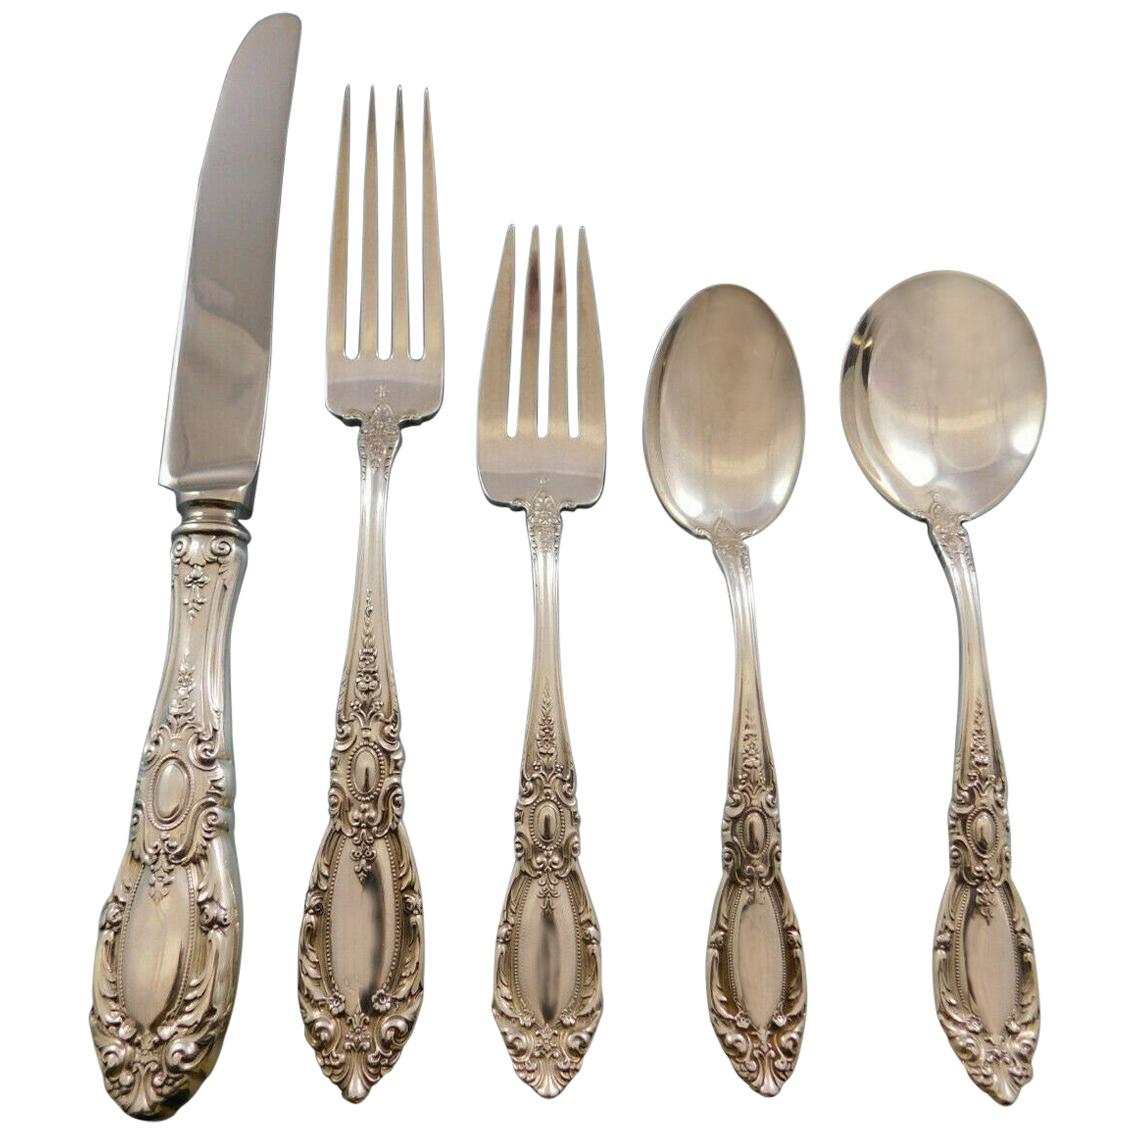 King Richard by Towle Sterling Silver Flatware Set 12 Service 60 Pcs Dinner Size